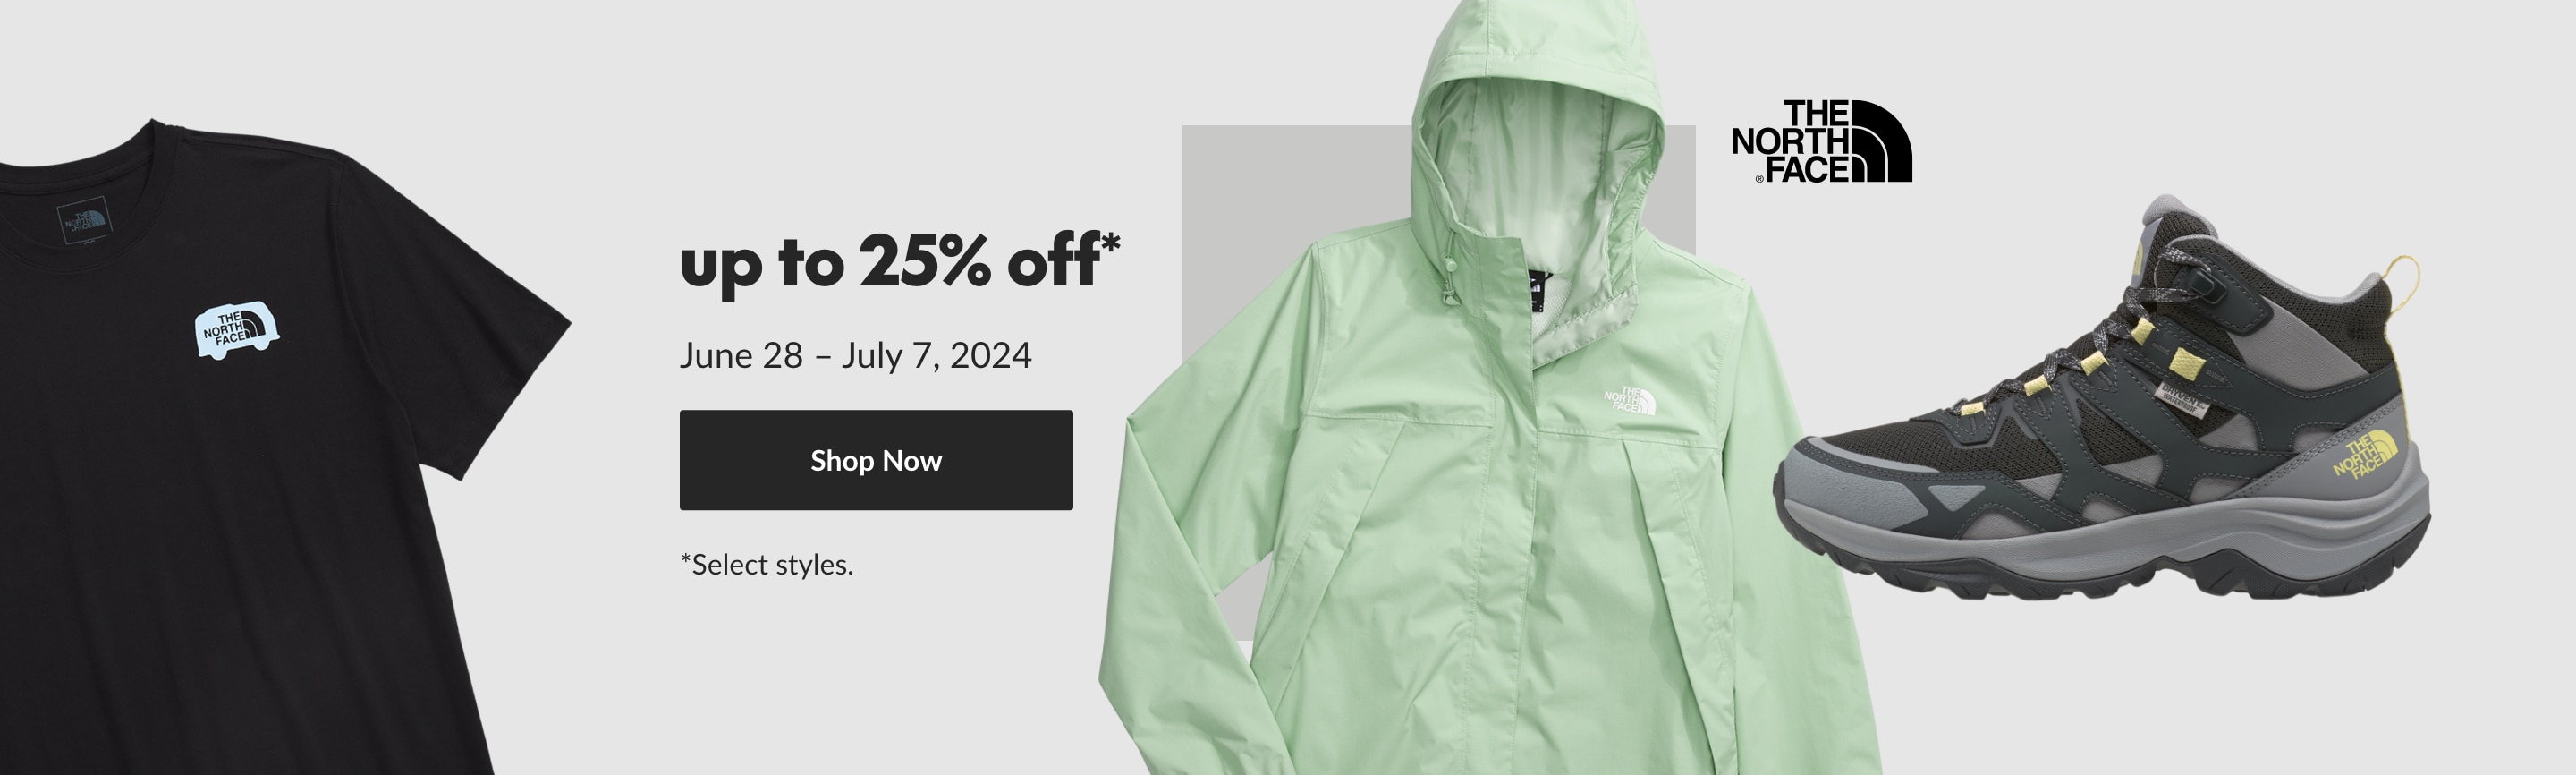 Take up to 25% off The North Face products from June 28 - July 7, 2024. Select styles.